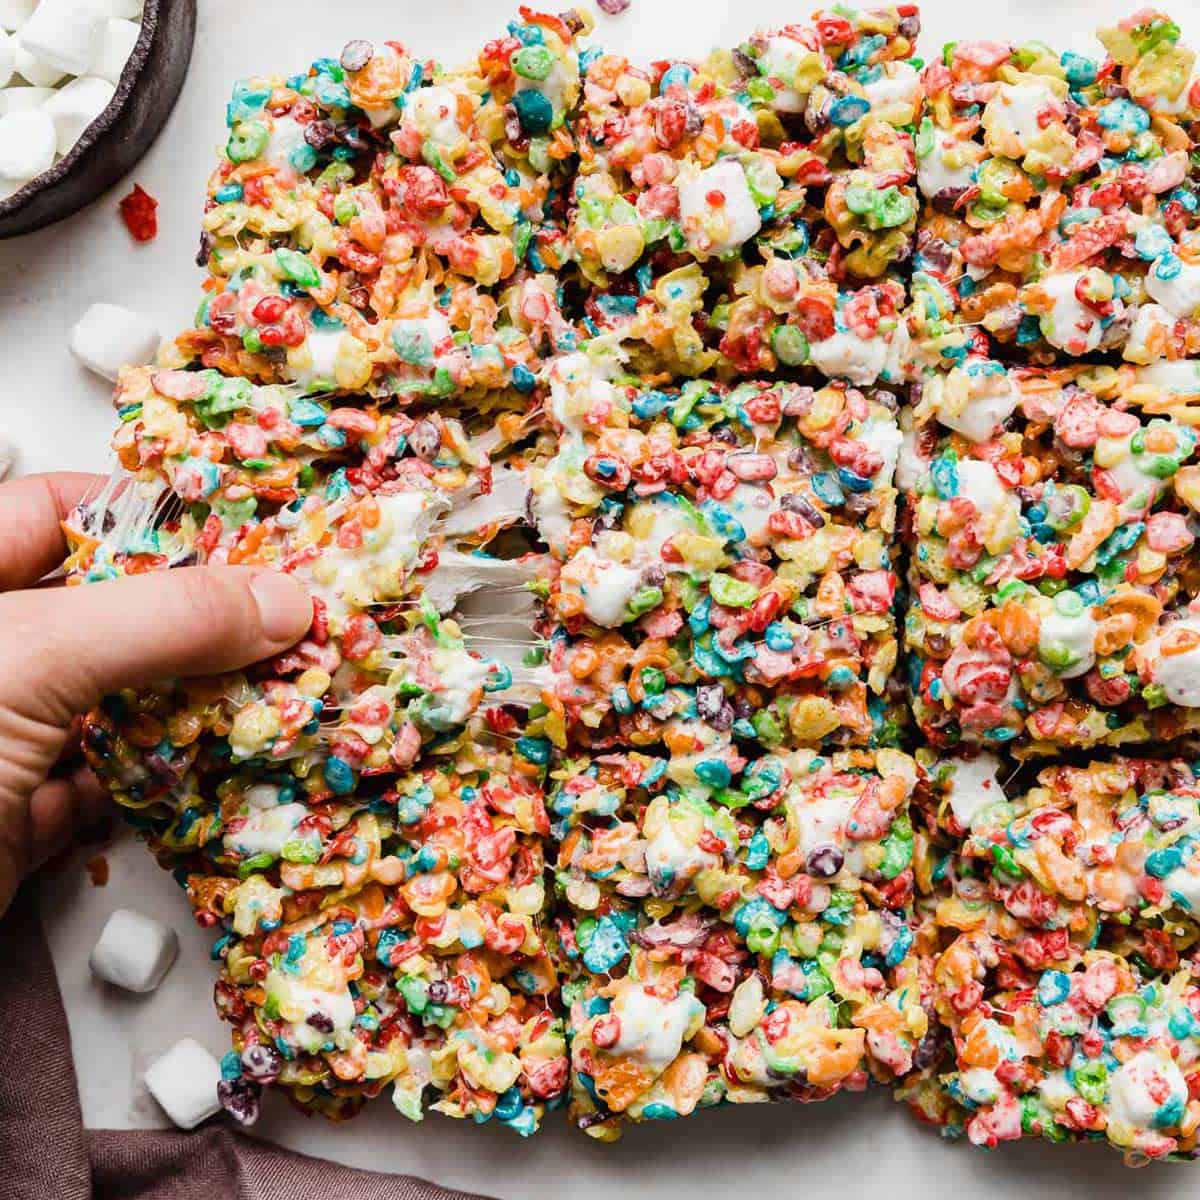 A hand grabbing a cut square of Fruity Pebble Rice Krispies Treats.